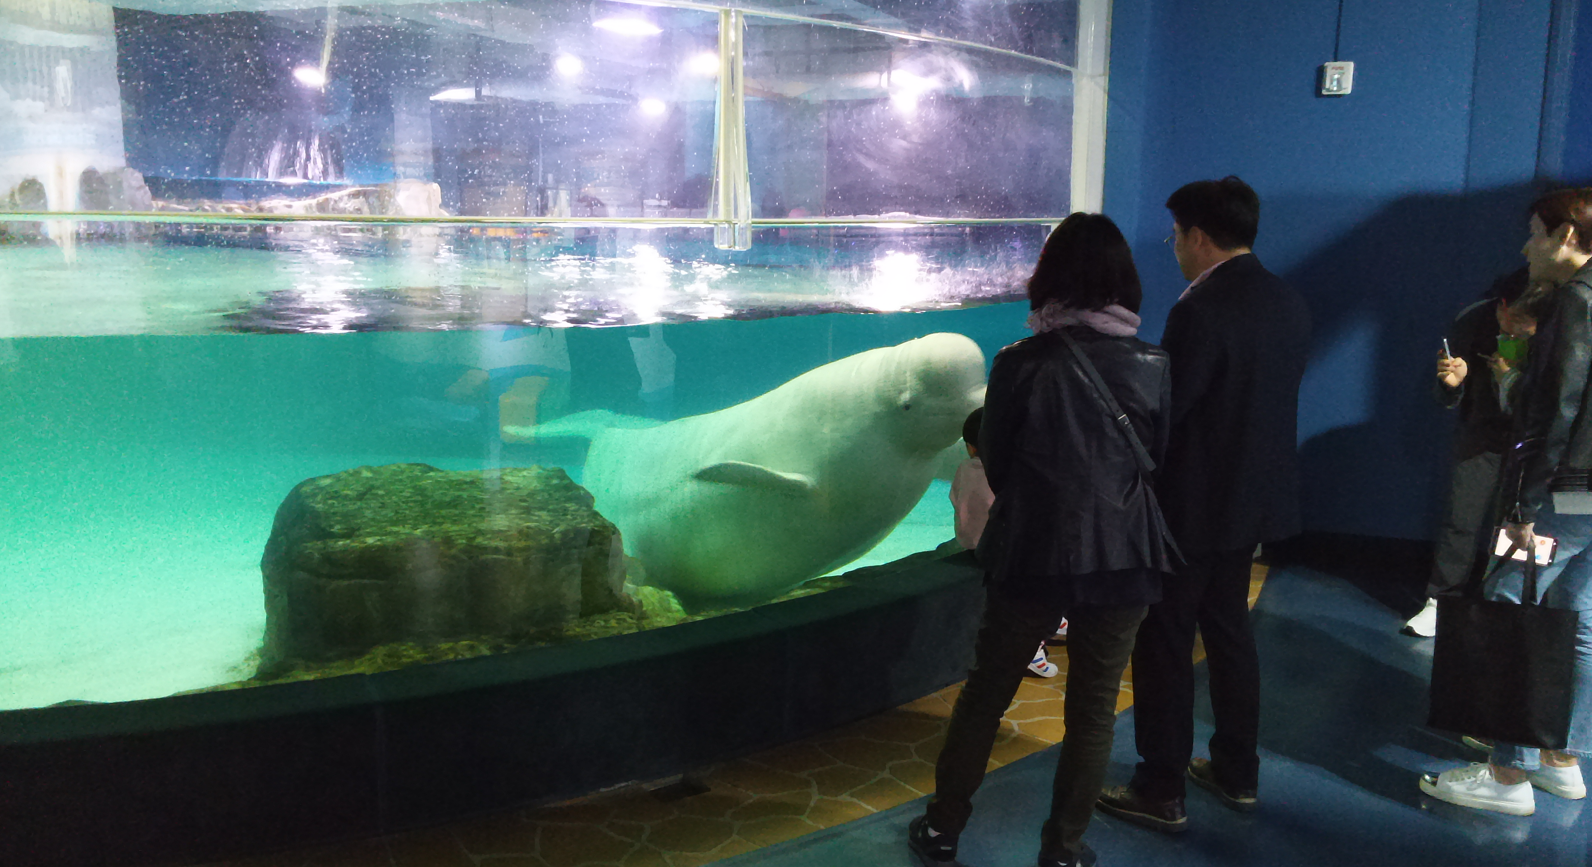 Bella the beluga whale at an aquarium in Seoul, surrounding by people.